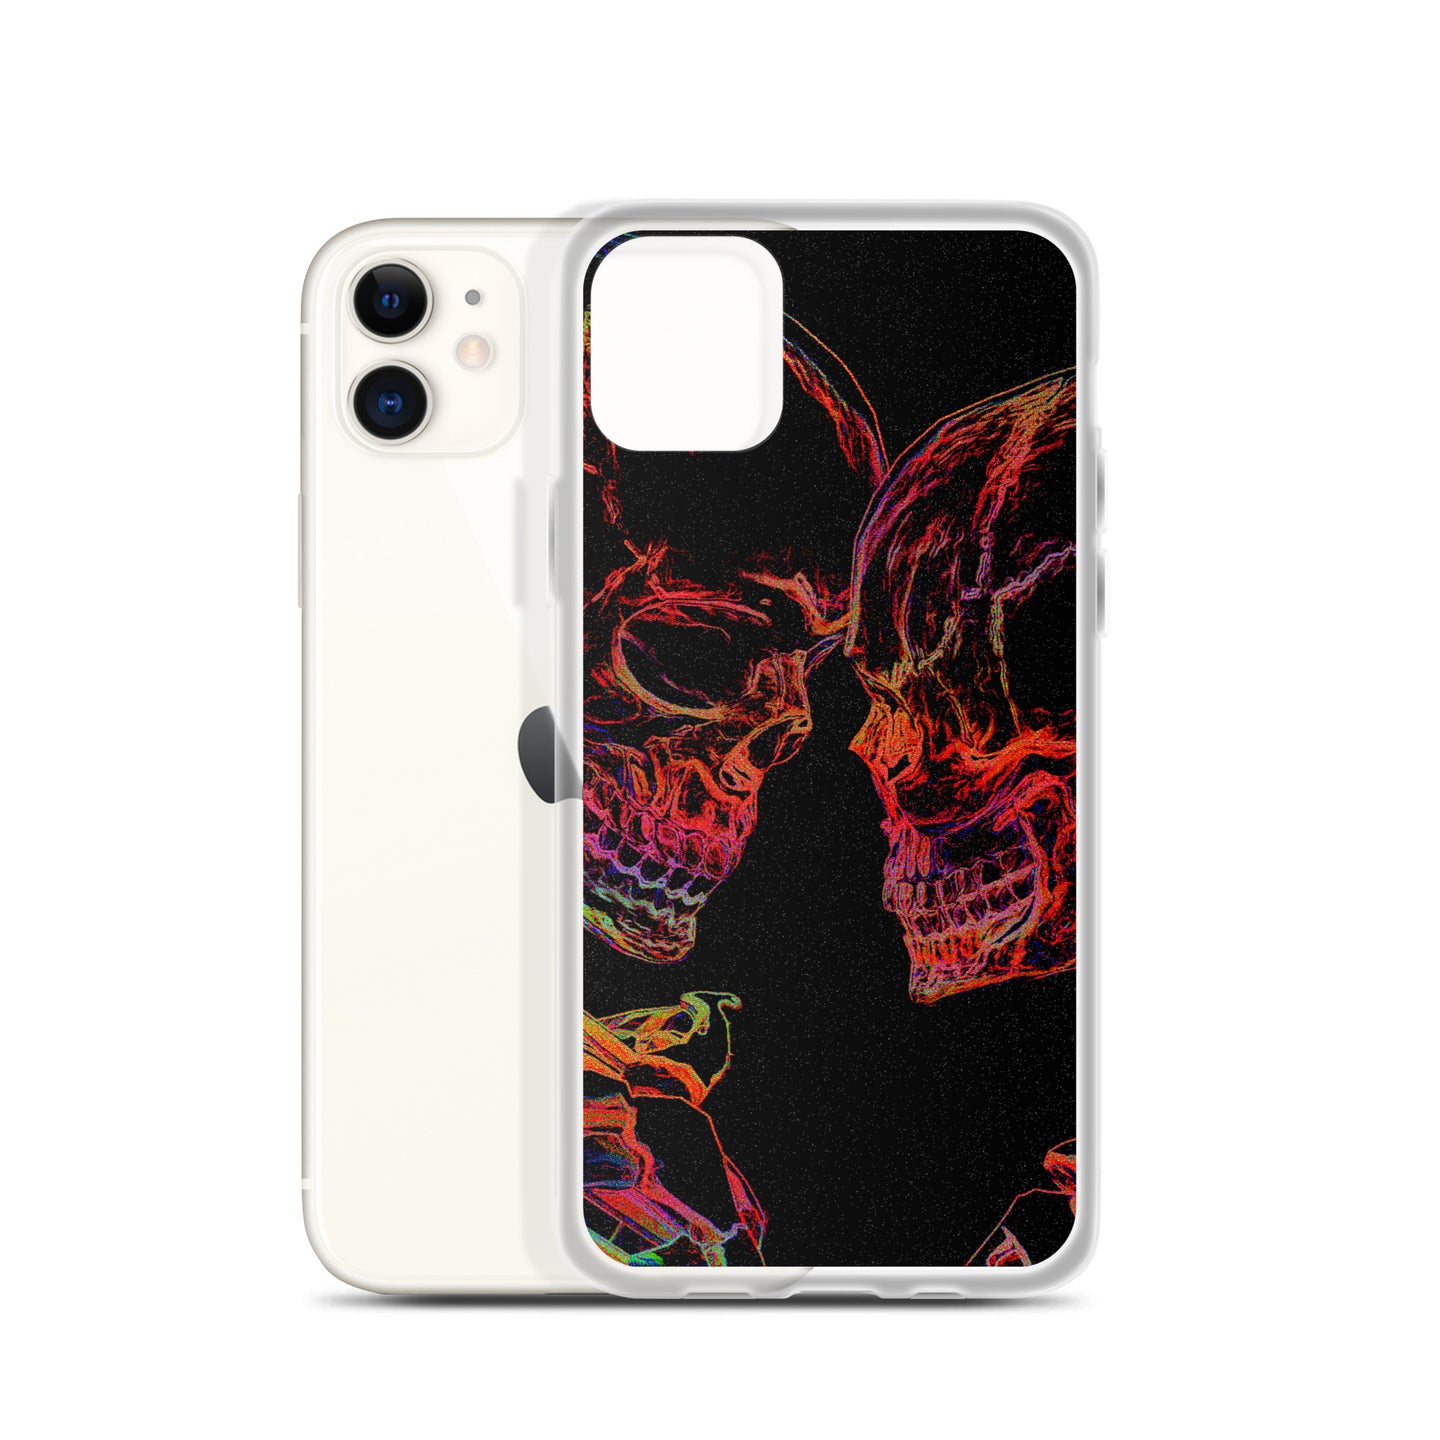 'no love like yours' iphone case